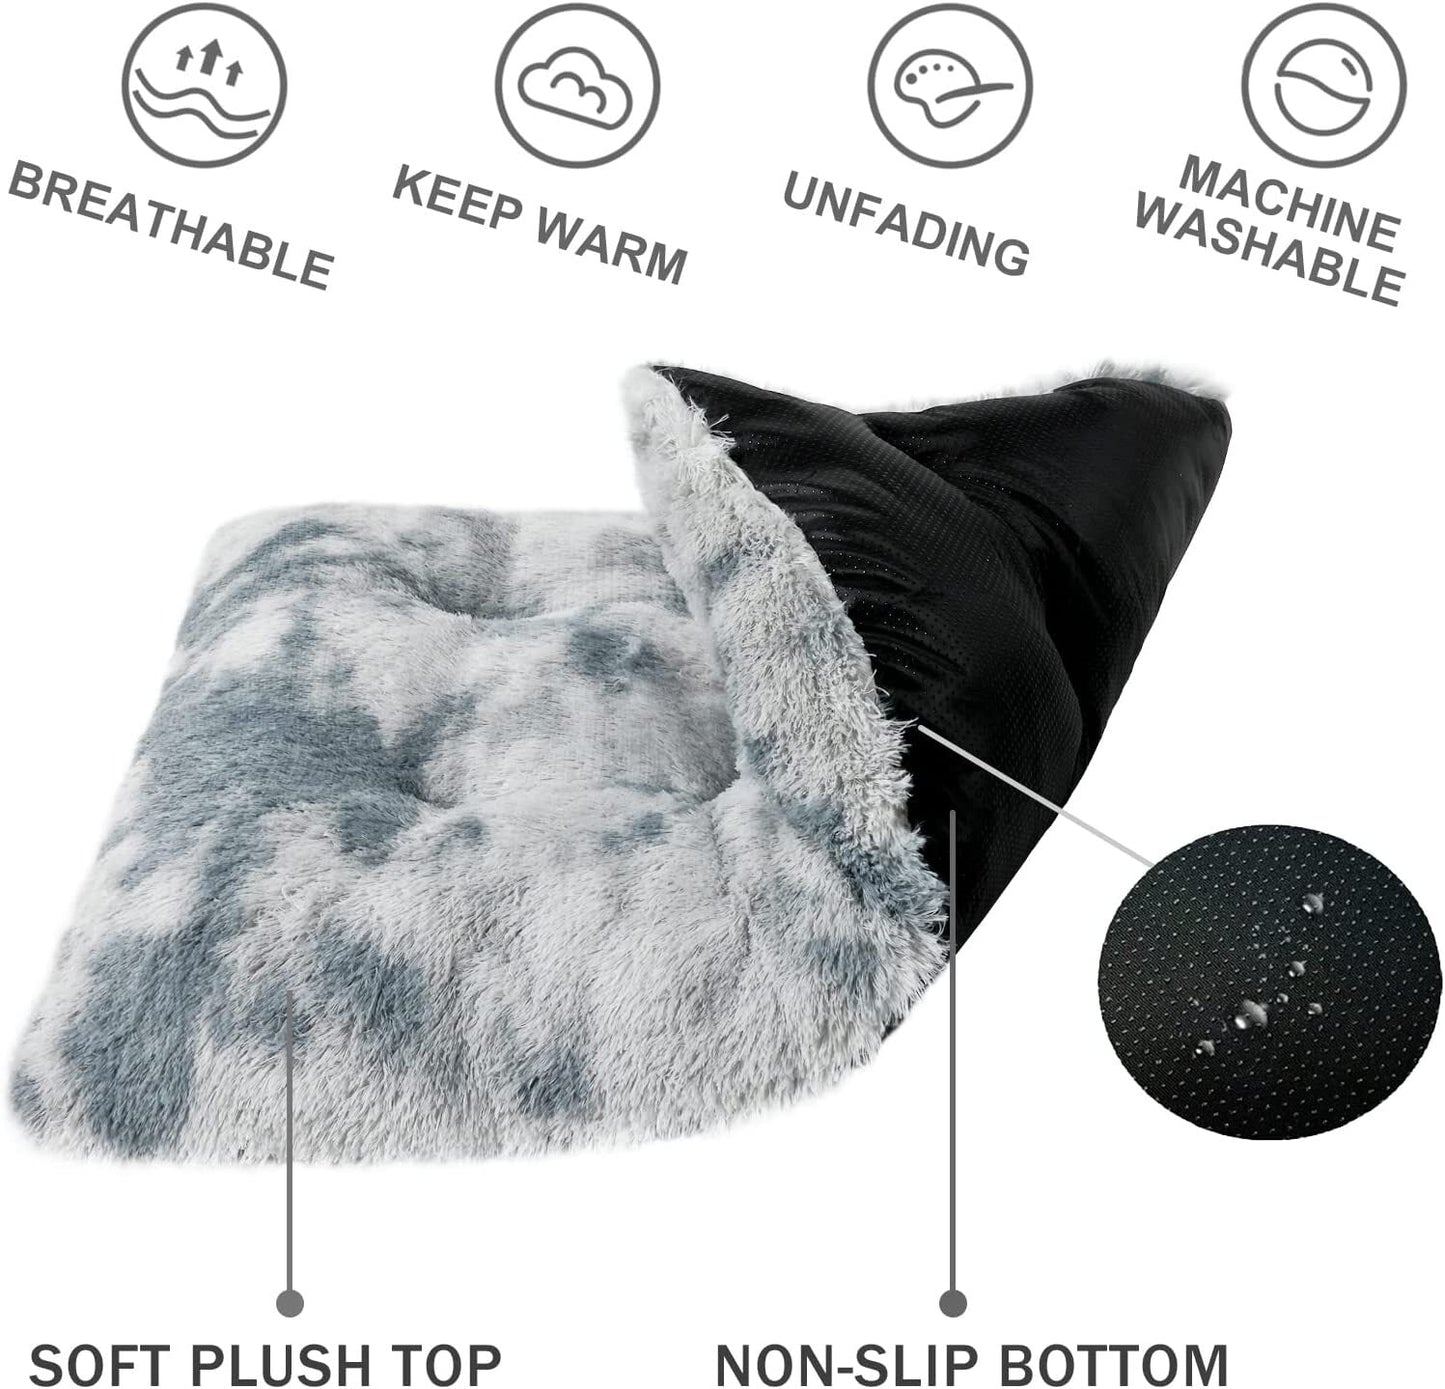 Exclusivo Mecla Soft Plush Dog Bed Crate Mat for Small Dogs (26*20*4 in), Faux Fur Fluffy Dog Pet Cat Kennel Pad with Anti-Slip Bottom, Machine Washable Gradient Grey